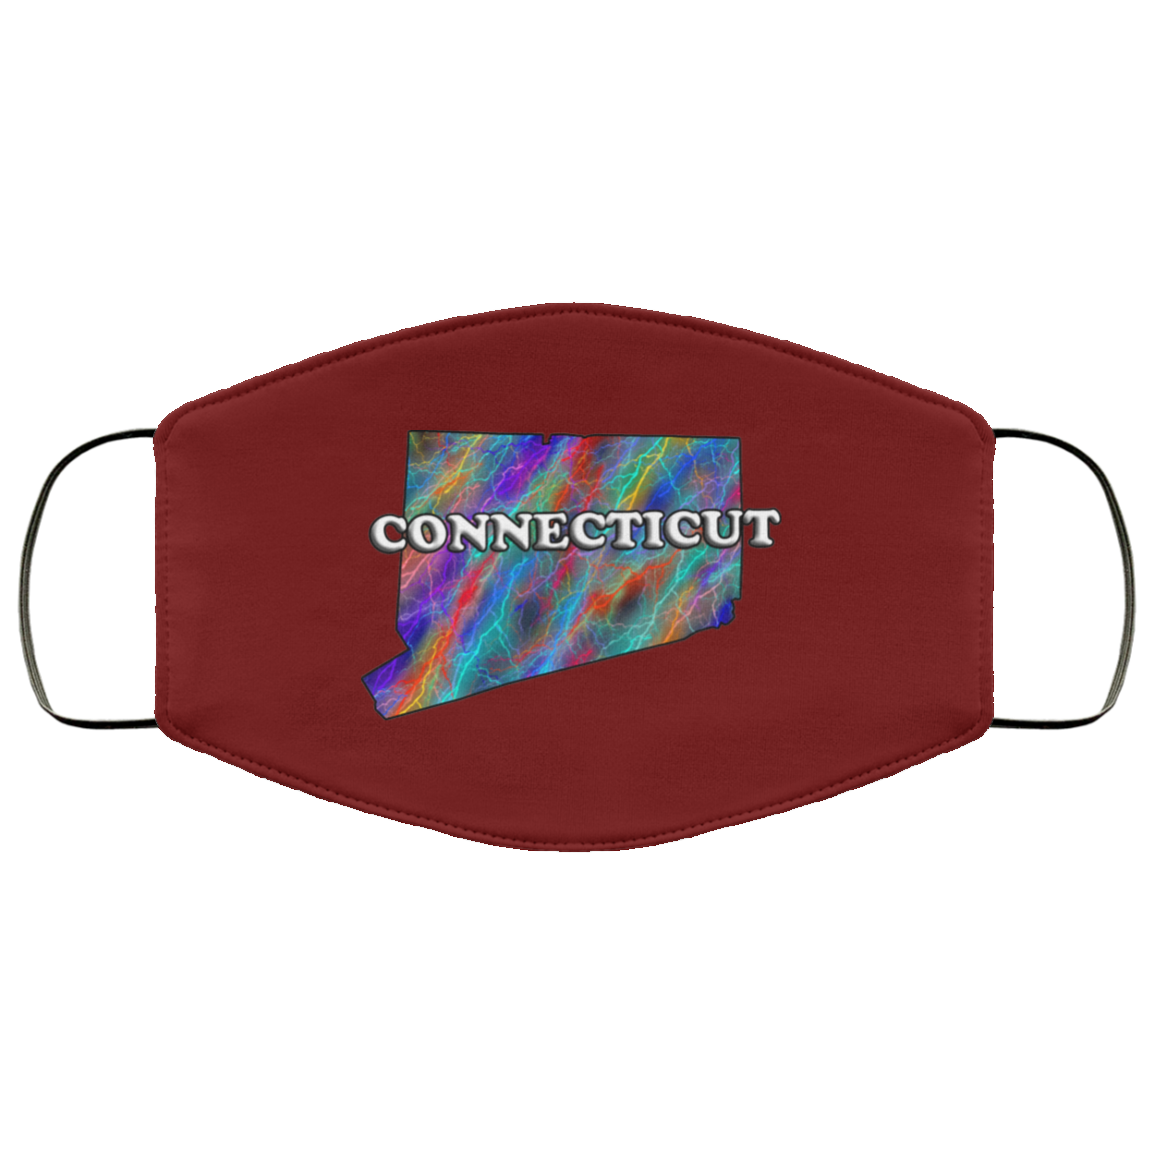 Connecticut 2 Layer Protective Face Mask